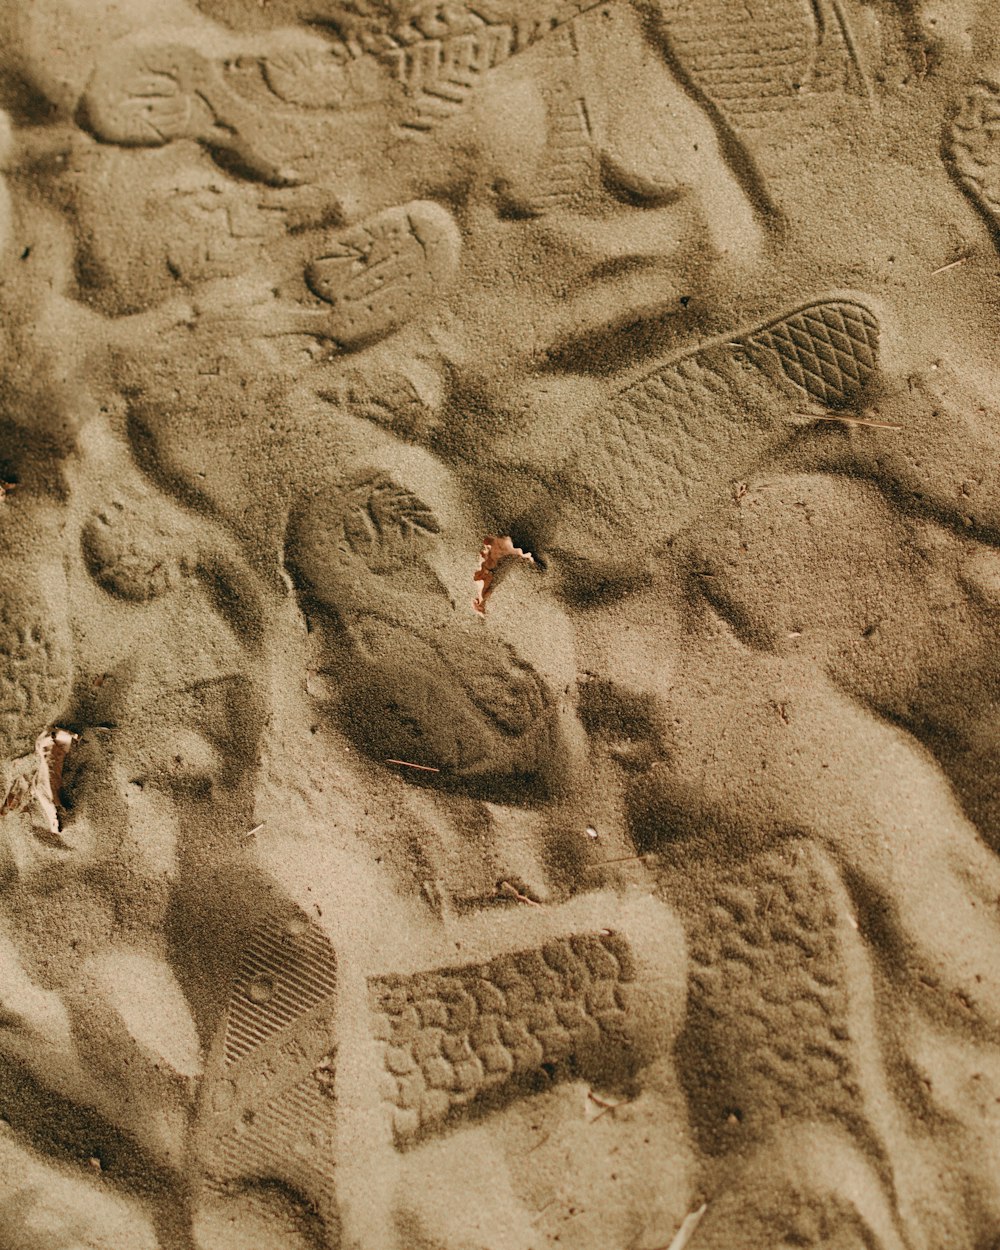 a close up of a person's shoes in the sand